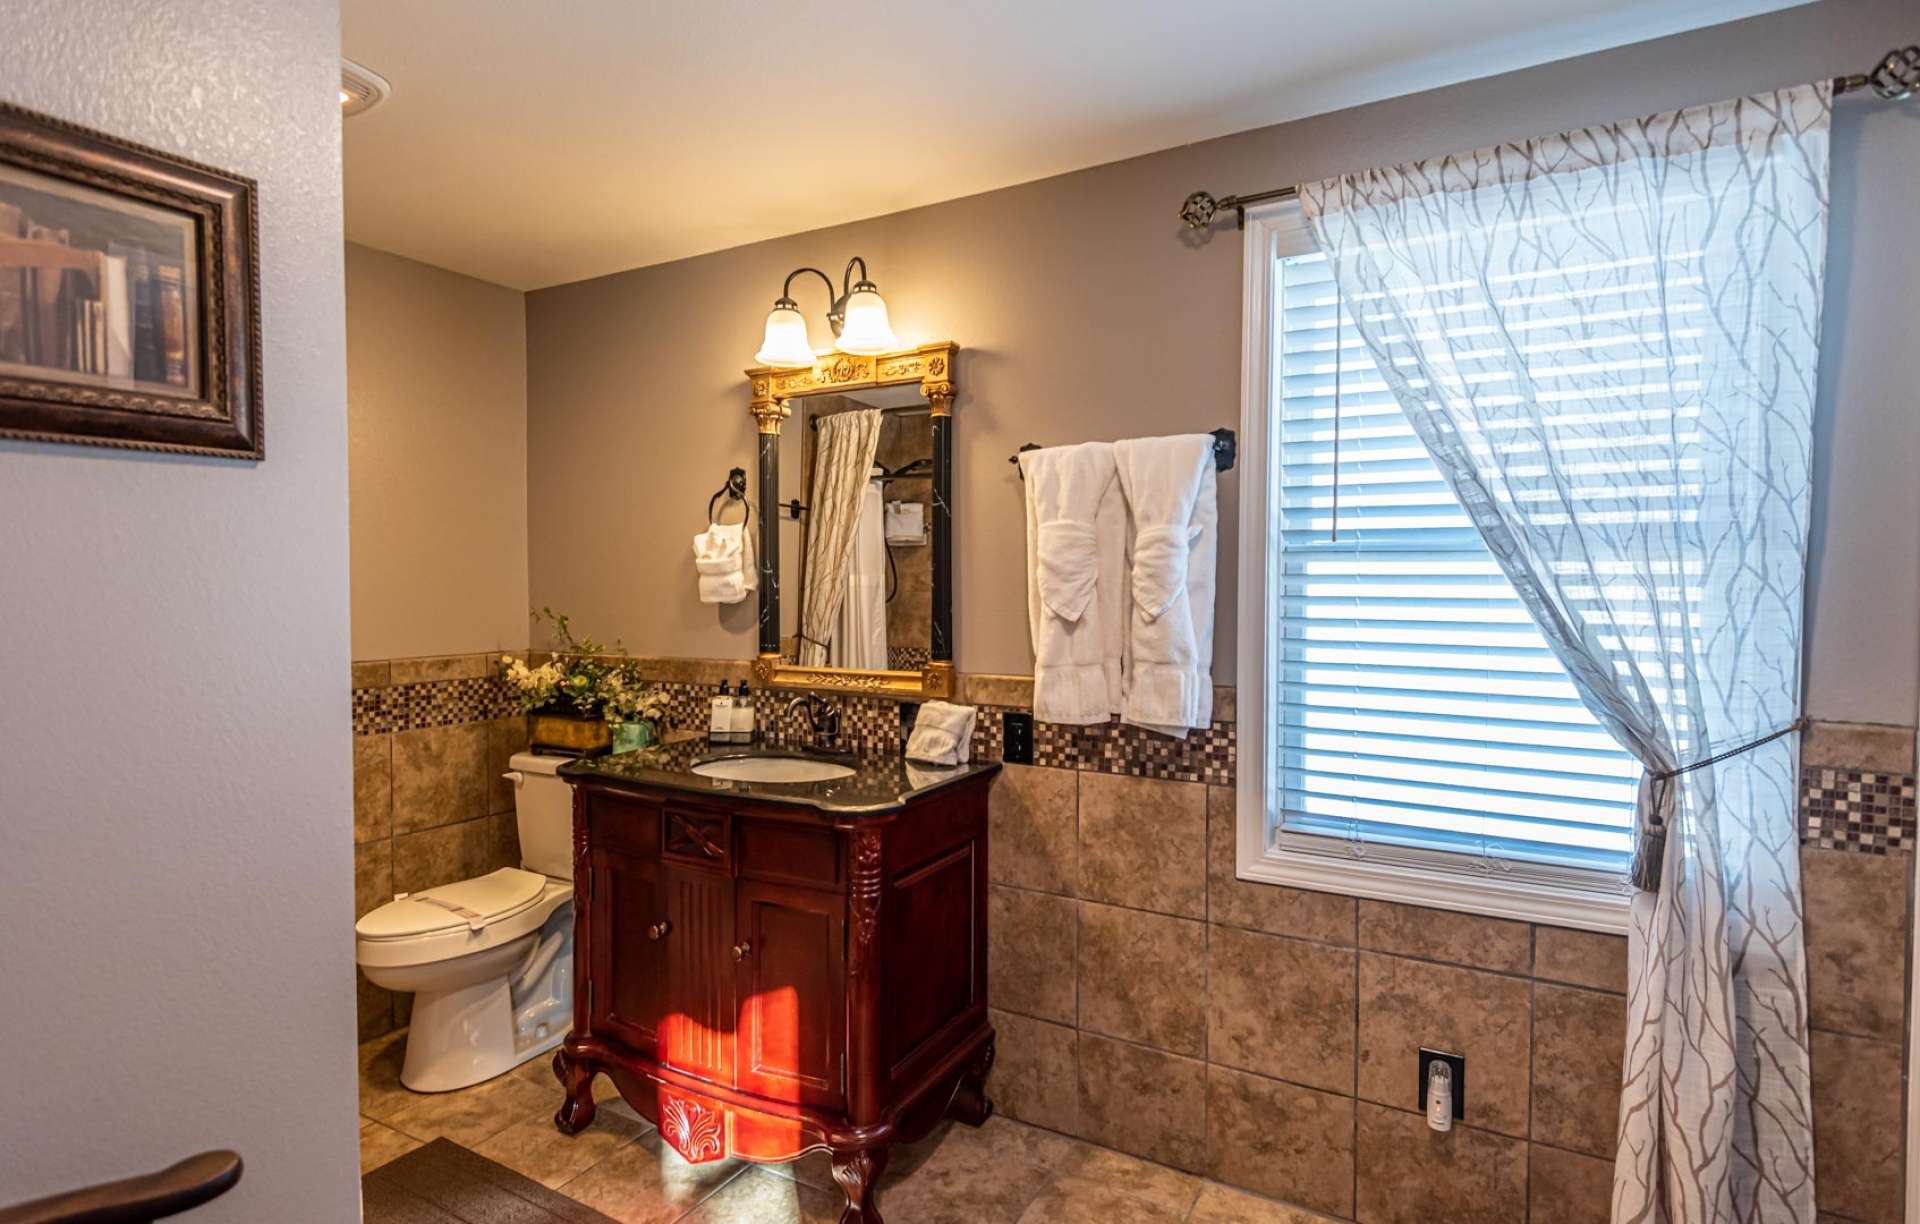 The master bath features ceramic tile floor, custom vanity, and a tiled walk-in shower.